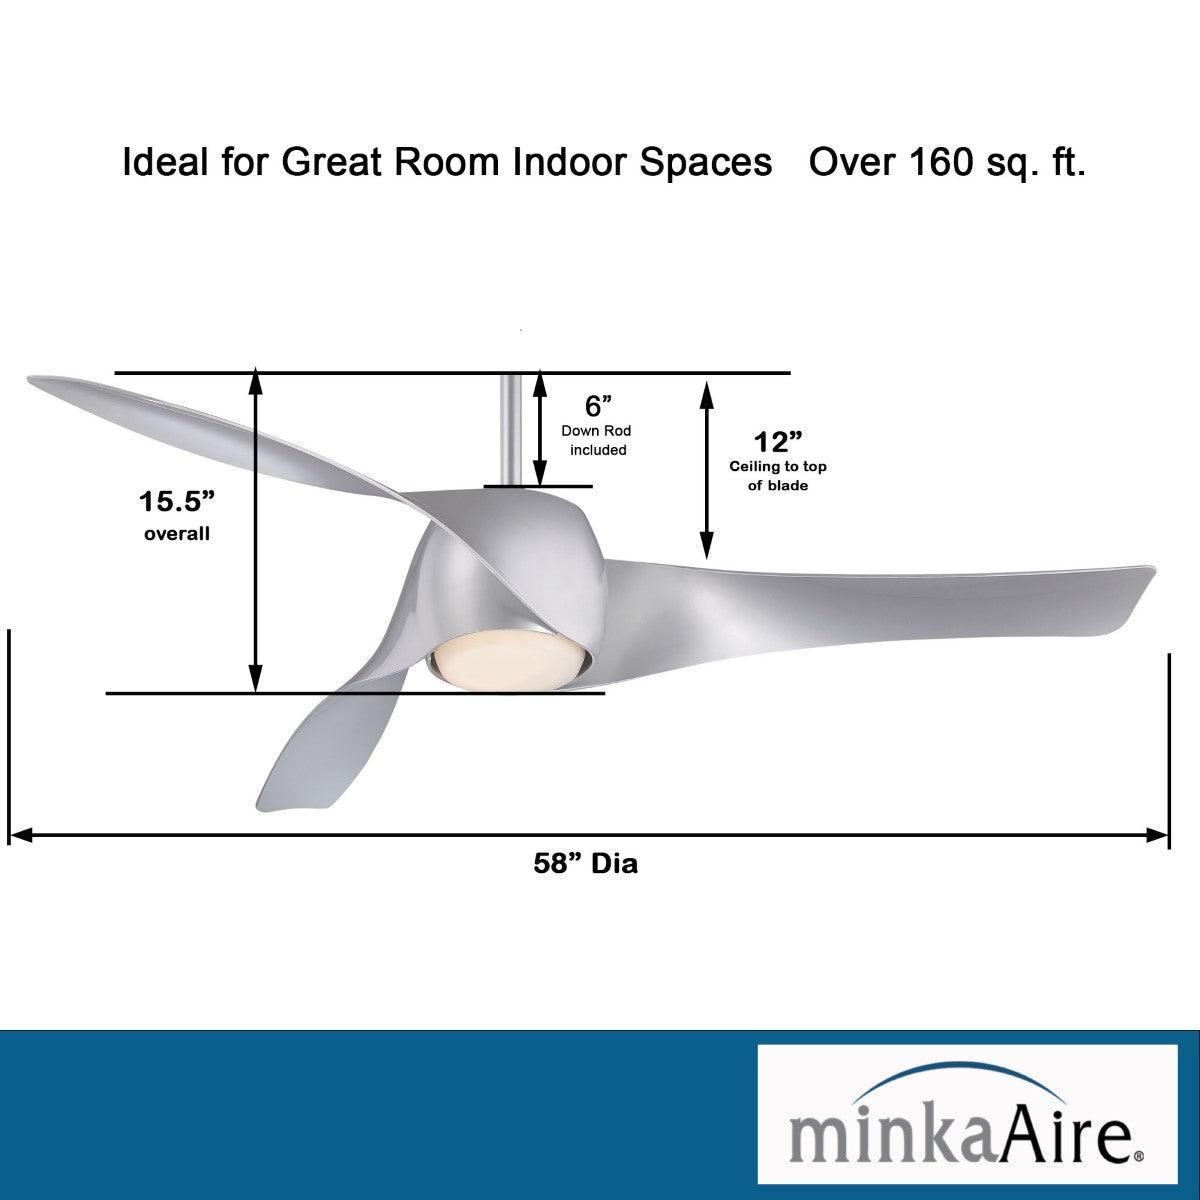 Artemis 58 Inch Modern Propeller Smart Ceiling Fan With Light And Remote - Bees Lighting